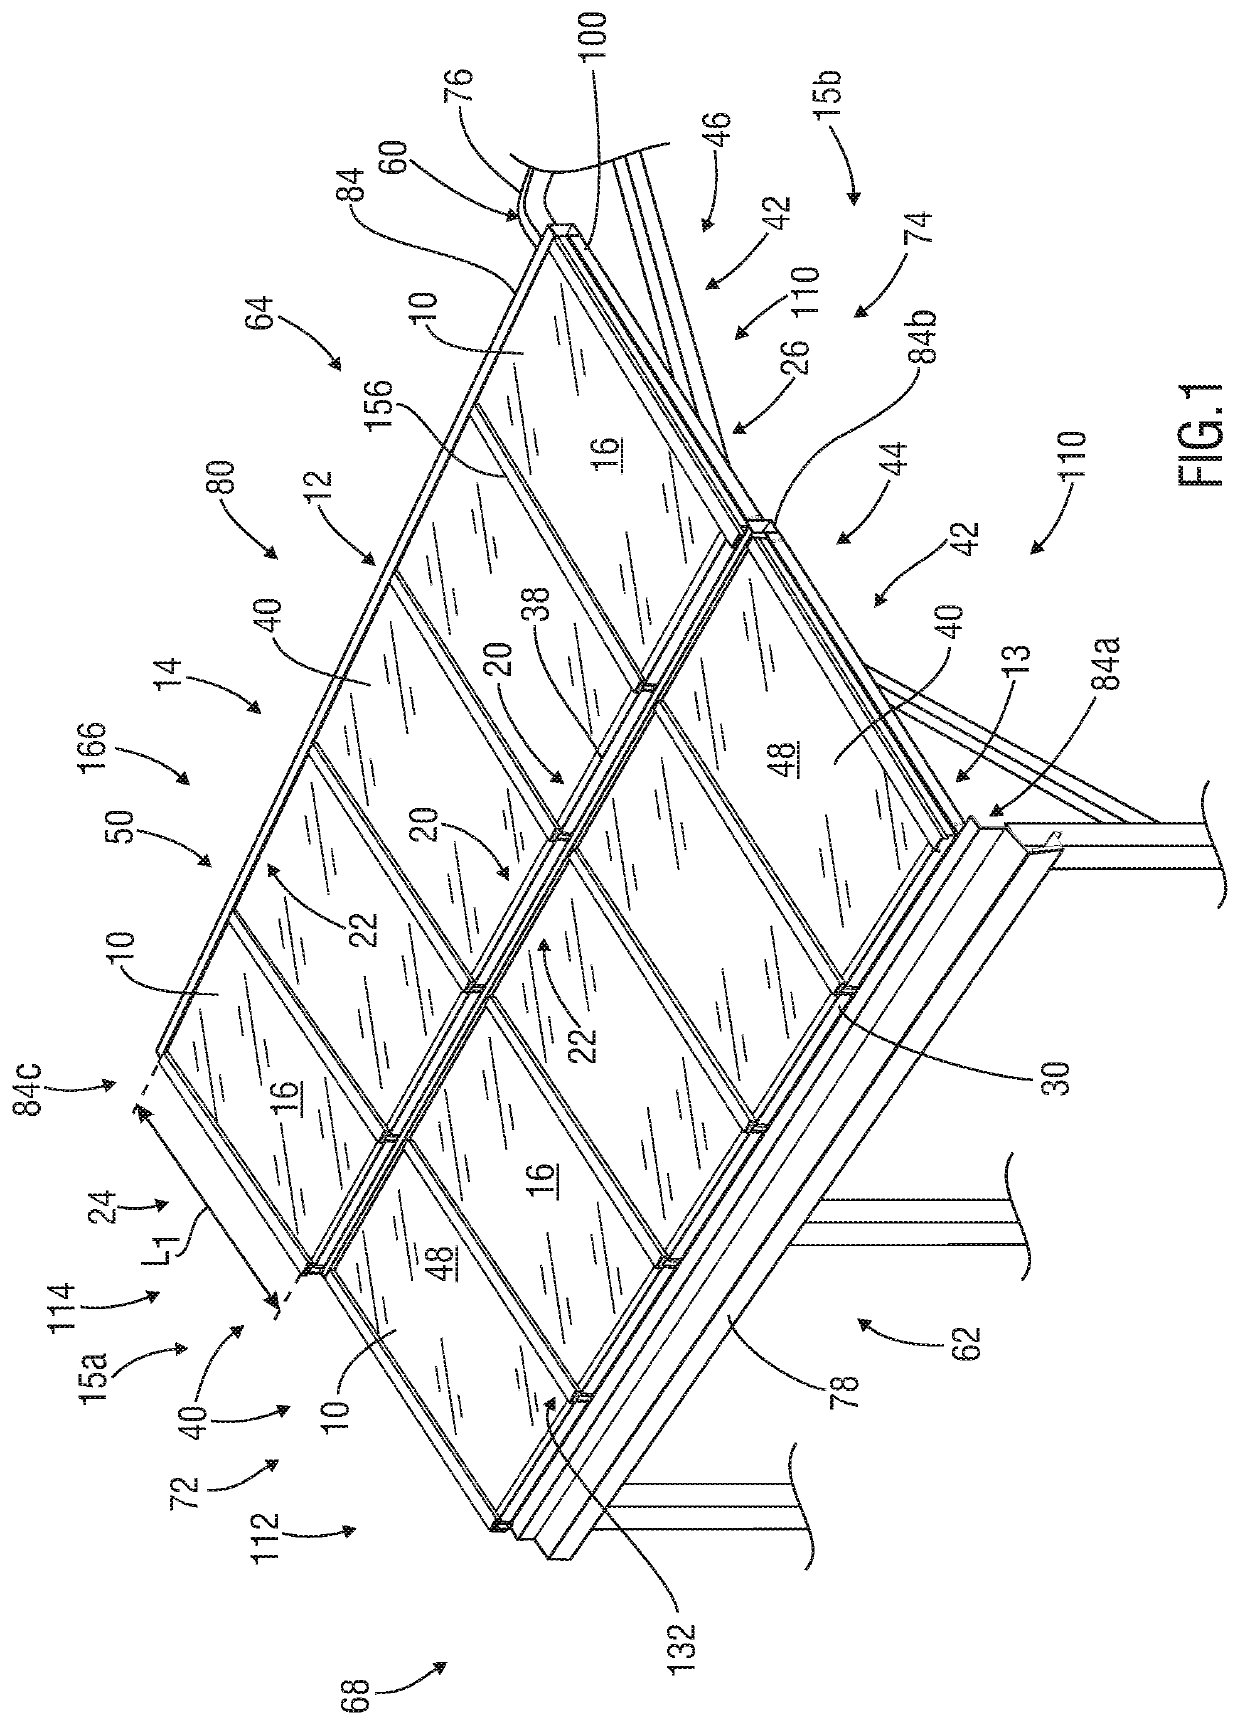 Systems, apparatus and methods for mounting panels upon, or to form, a pitched roof, wall or other structure